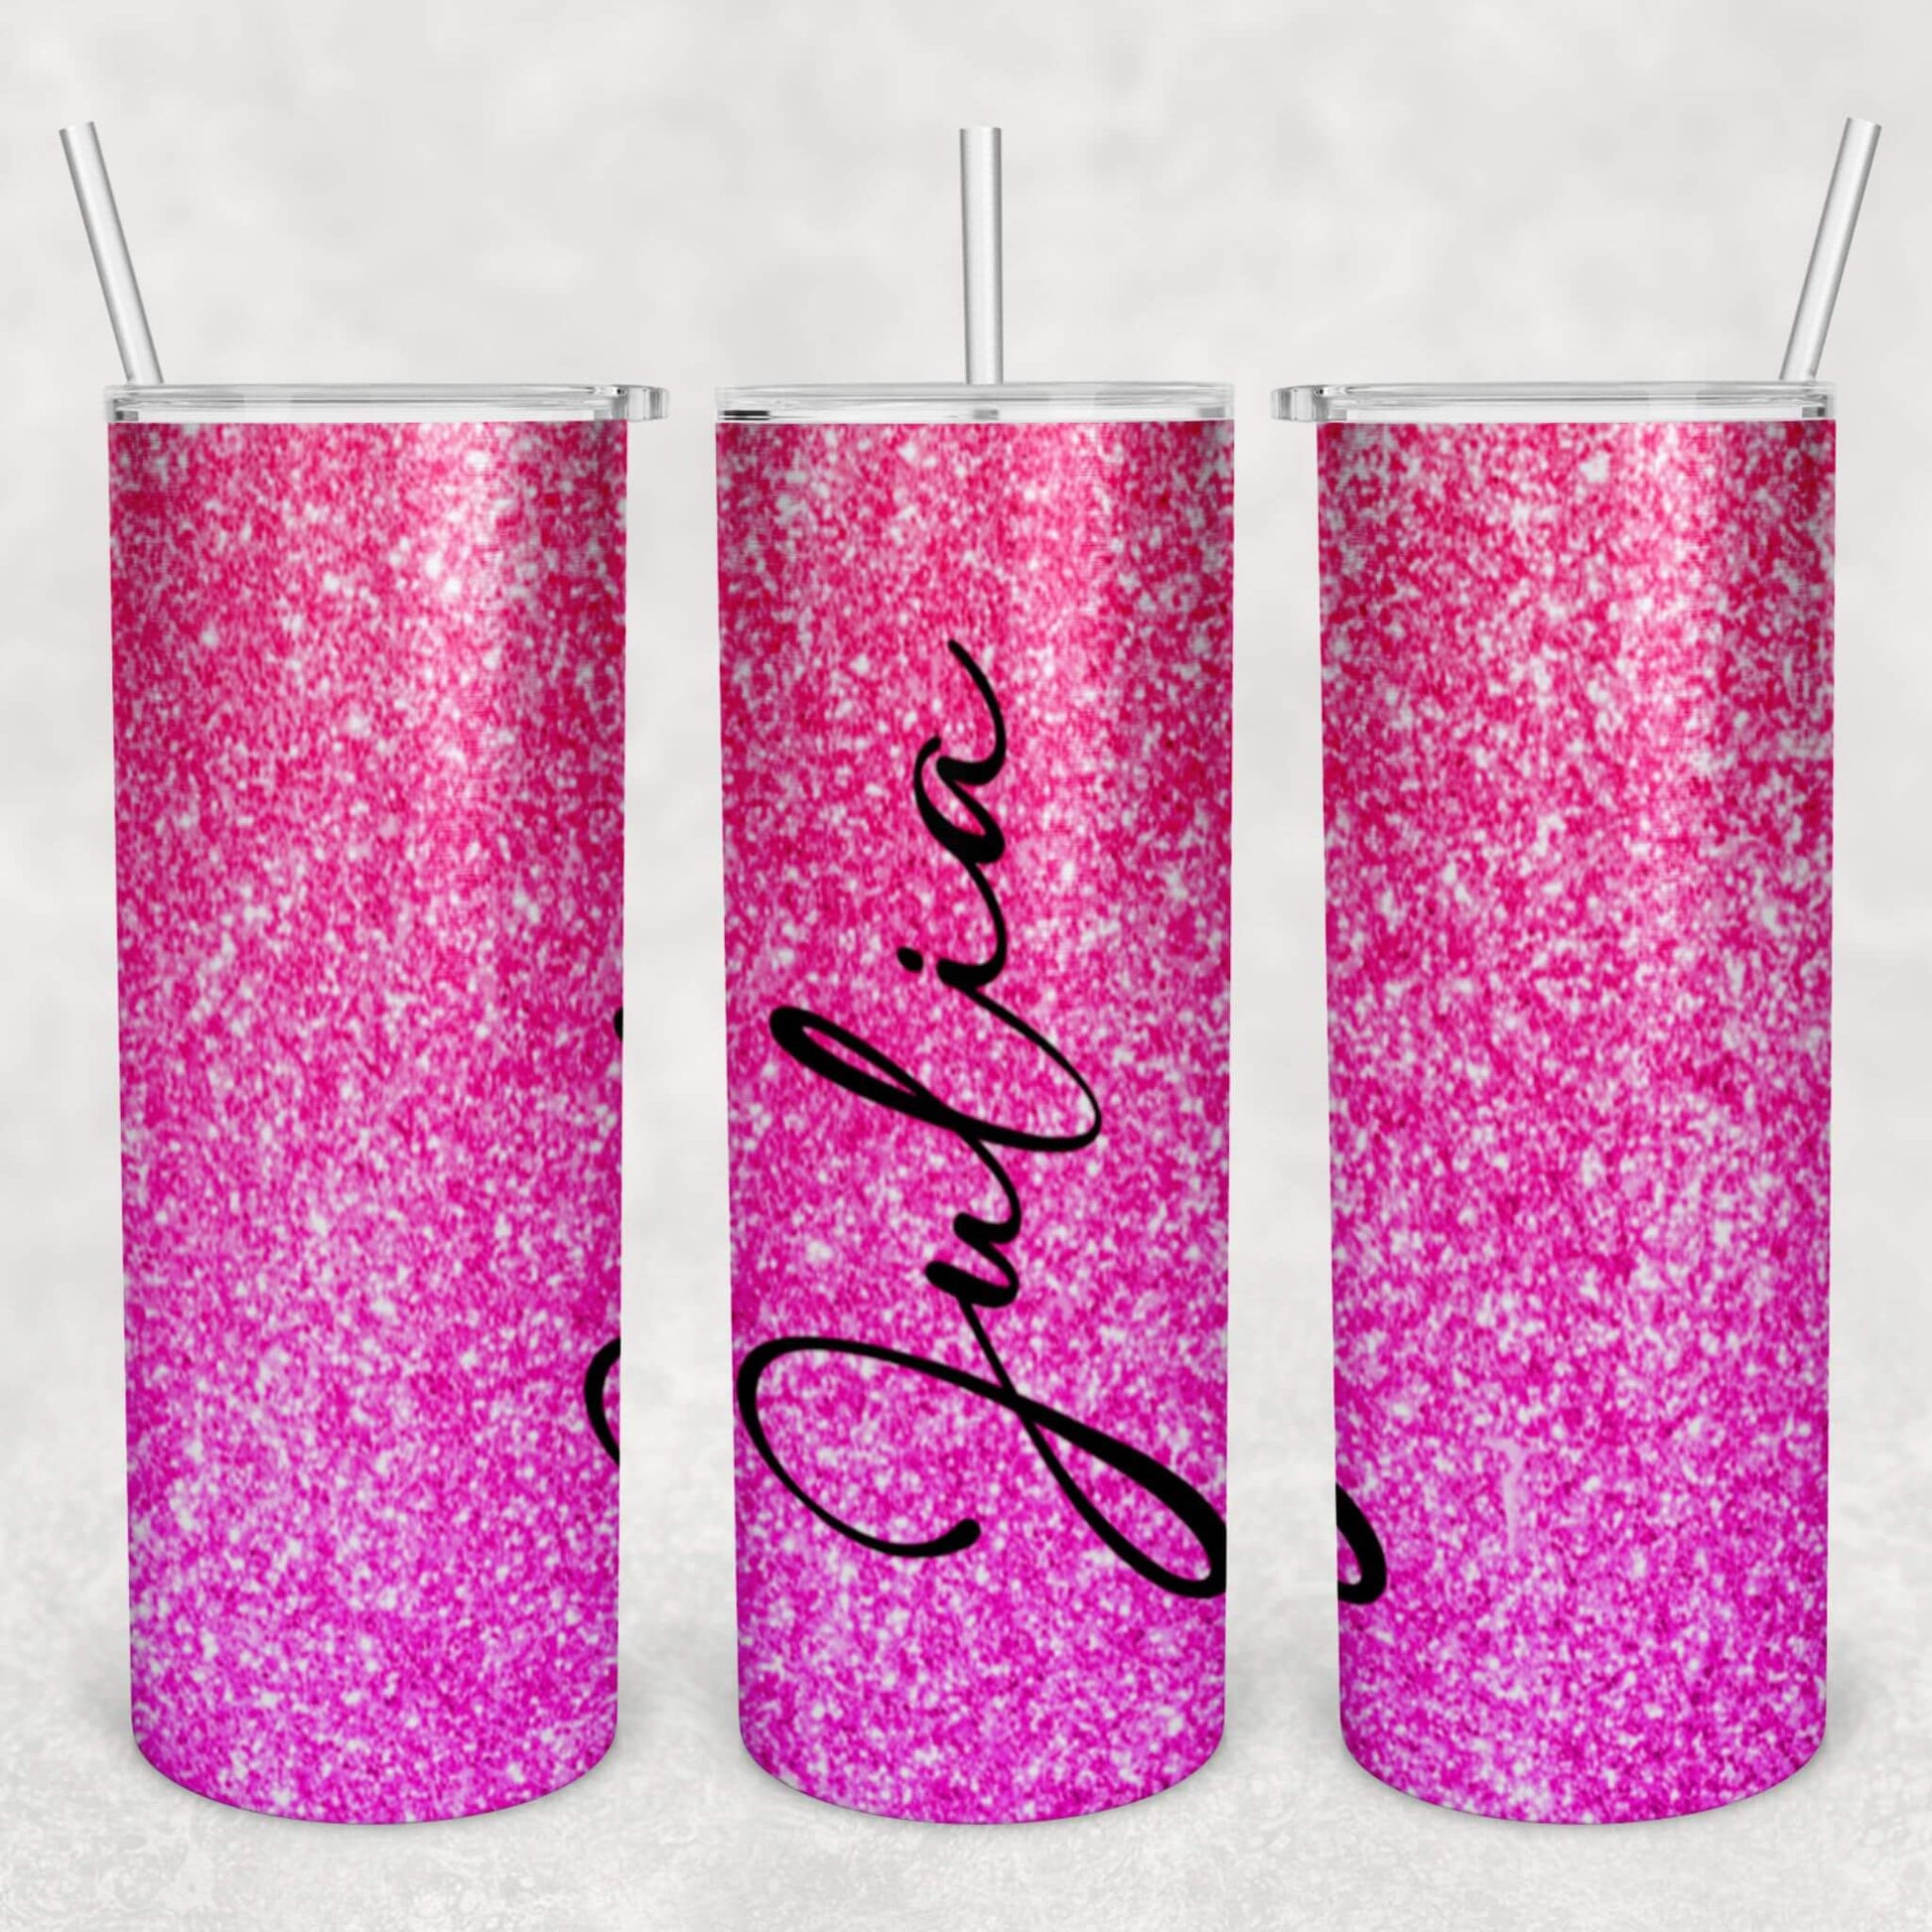 Sublimation Ready Tumblers - Save A Cup